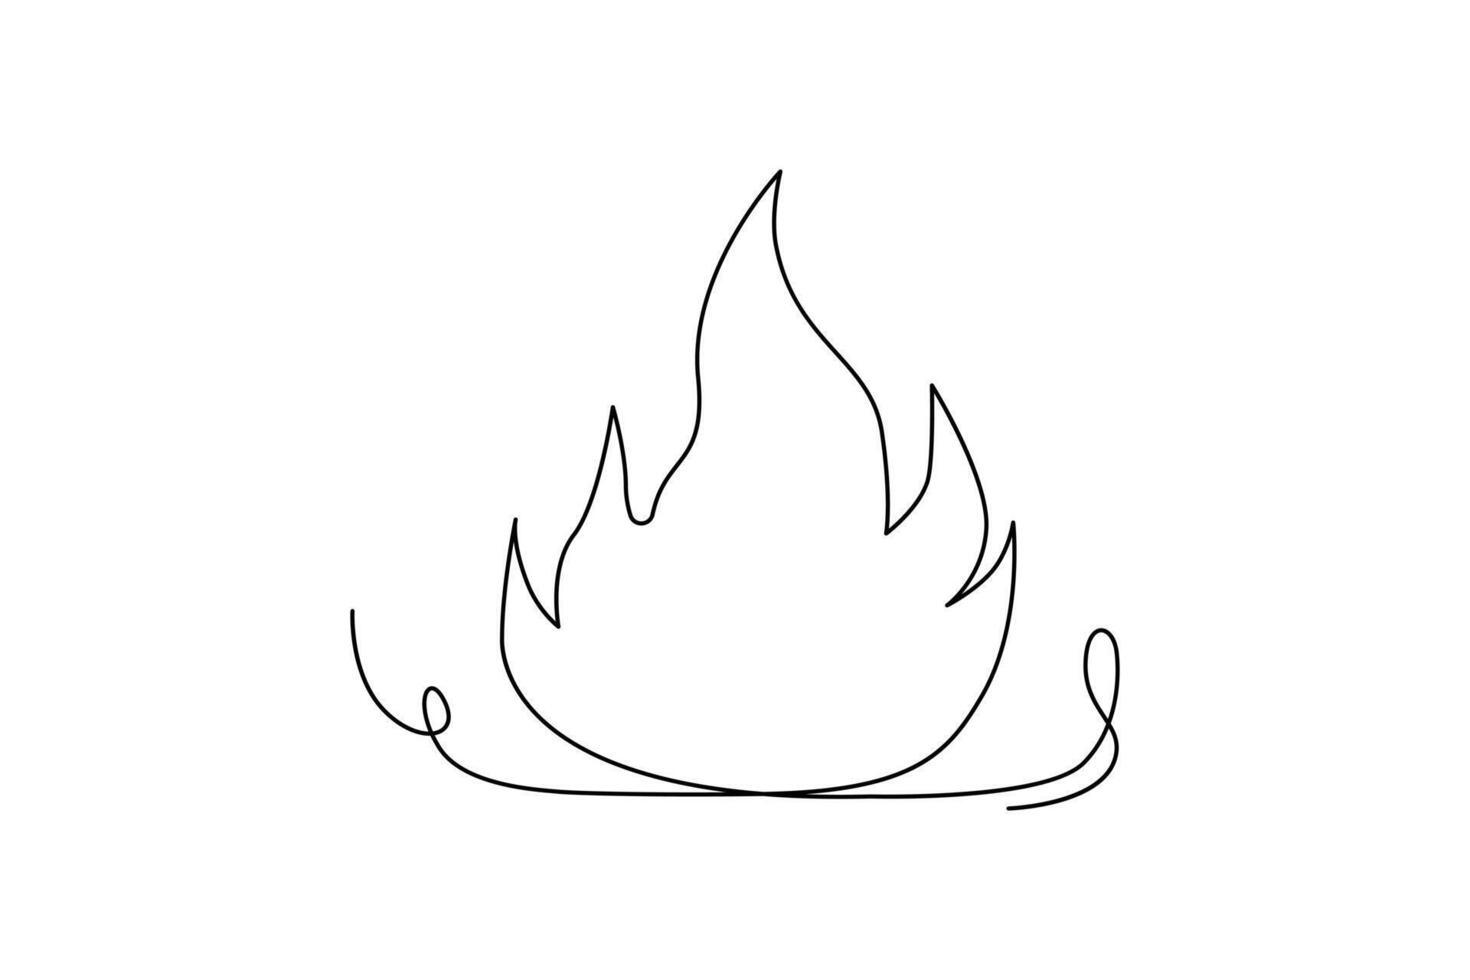 Continuous single-line bonfire drawing and outline fire concept art illustration vector